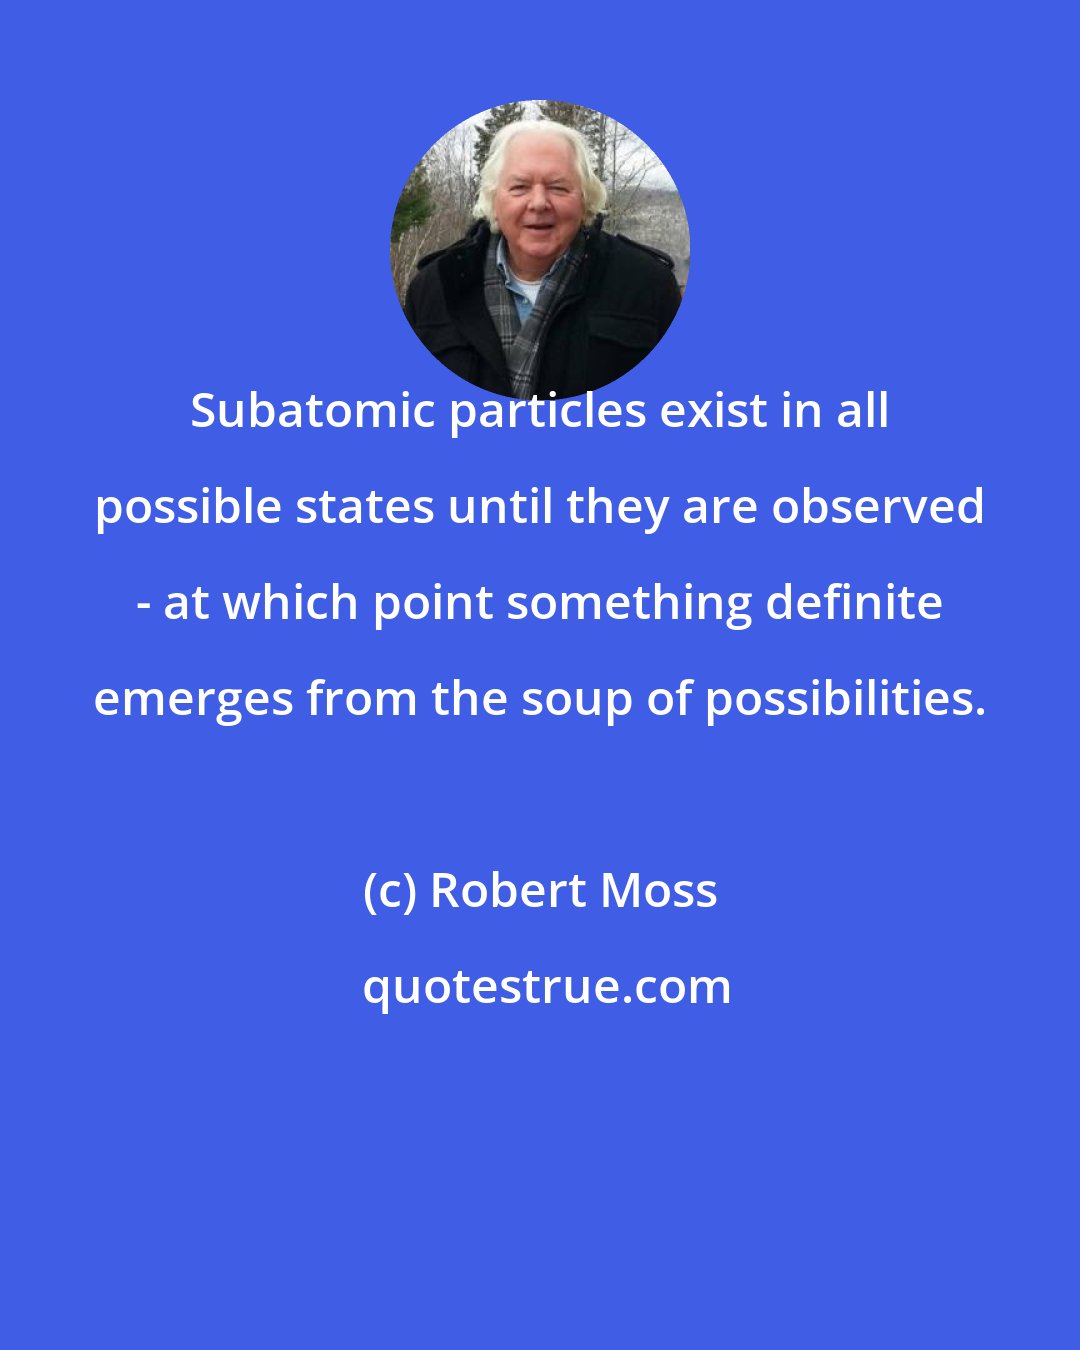 Robert Moss: Subatomic particles exist in all possible states until they are observed - at which point something definite emerges from the soup of possibilities.